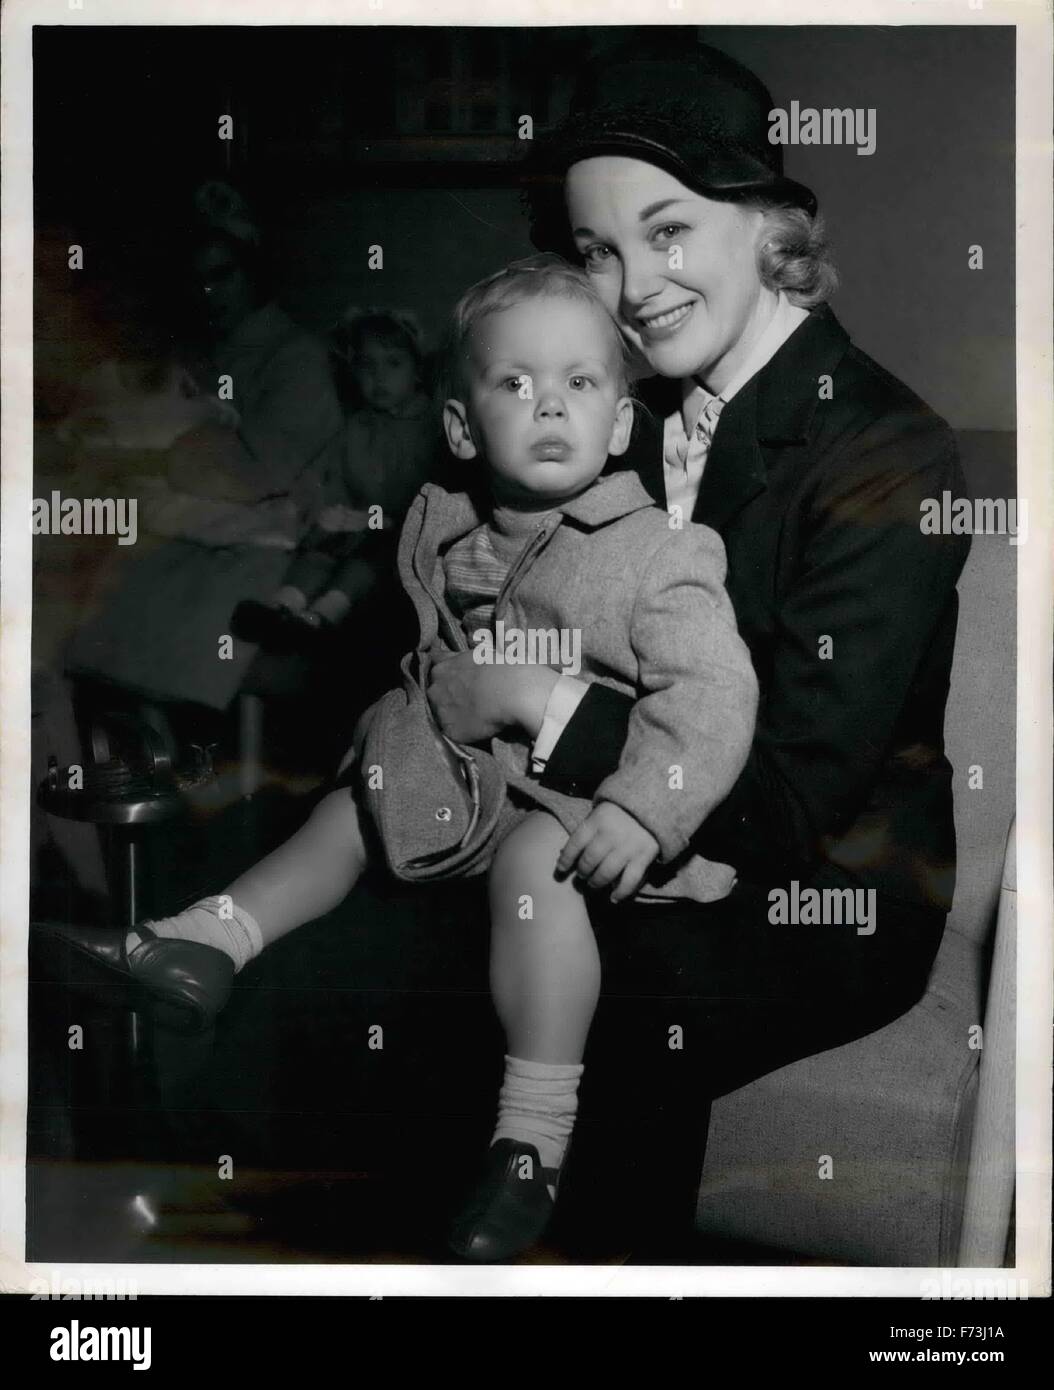 1968 - Idlewild Airport, N.Y. march 25 - Actress Jan Sterling and her 16-month-old son, Adams, are shown after their arrival here this morning Via Twa from Los Angeles. They're here to spend some time with miss sterling's Husband, Paul Douglas, who is starring in a Broadway play. © Keystone Pictures USA/ZUMAPRESS.com/Alamy Live News Stock Photo